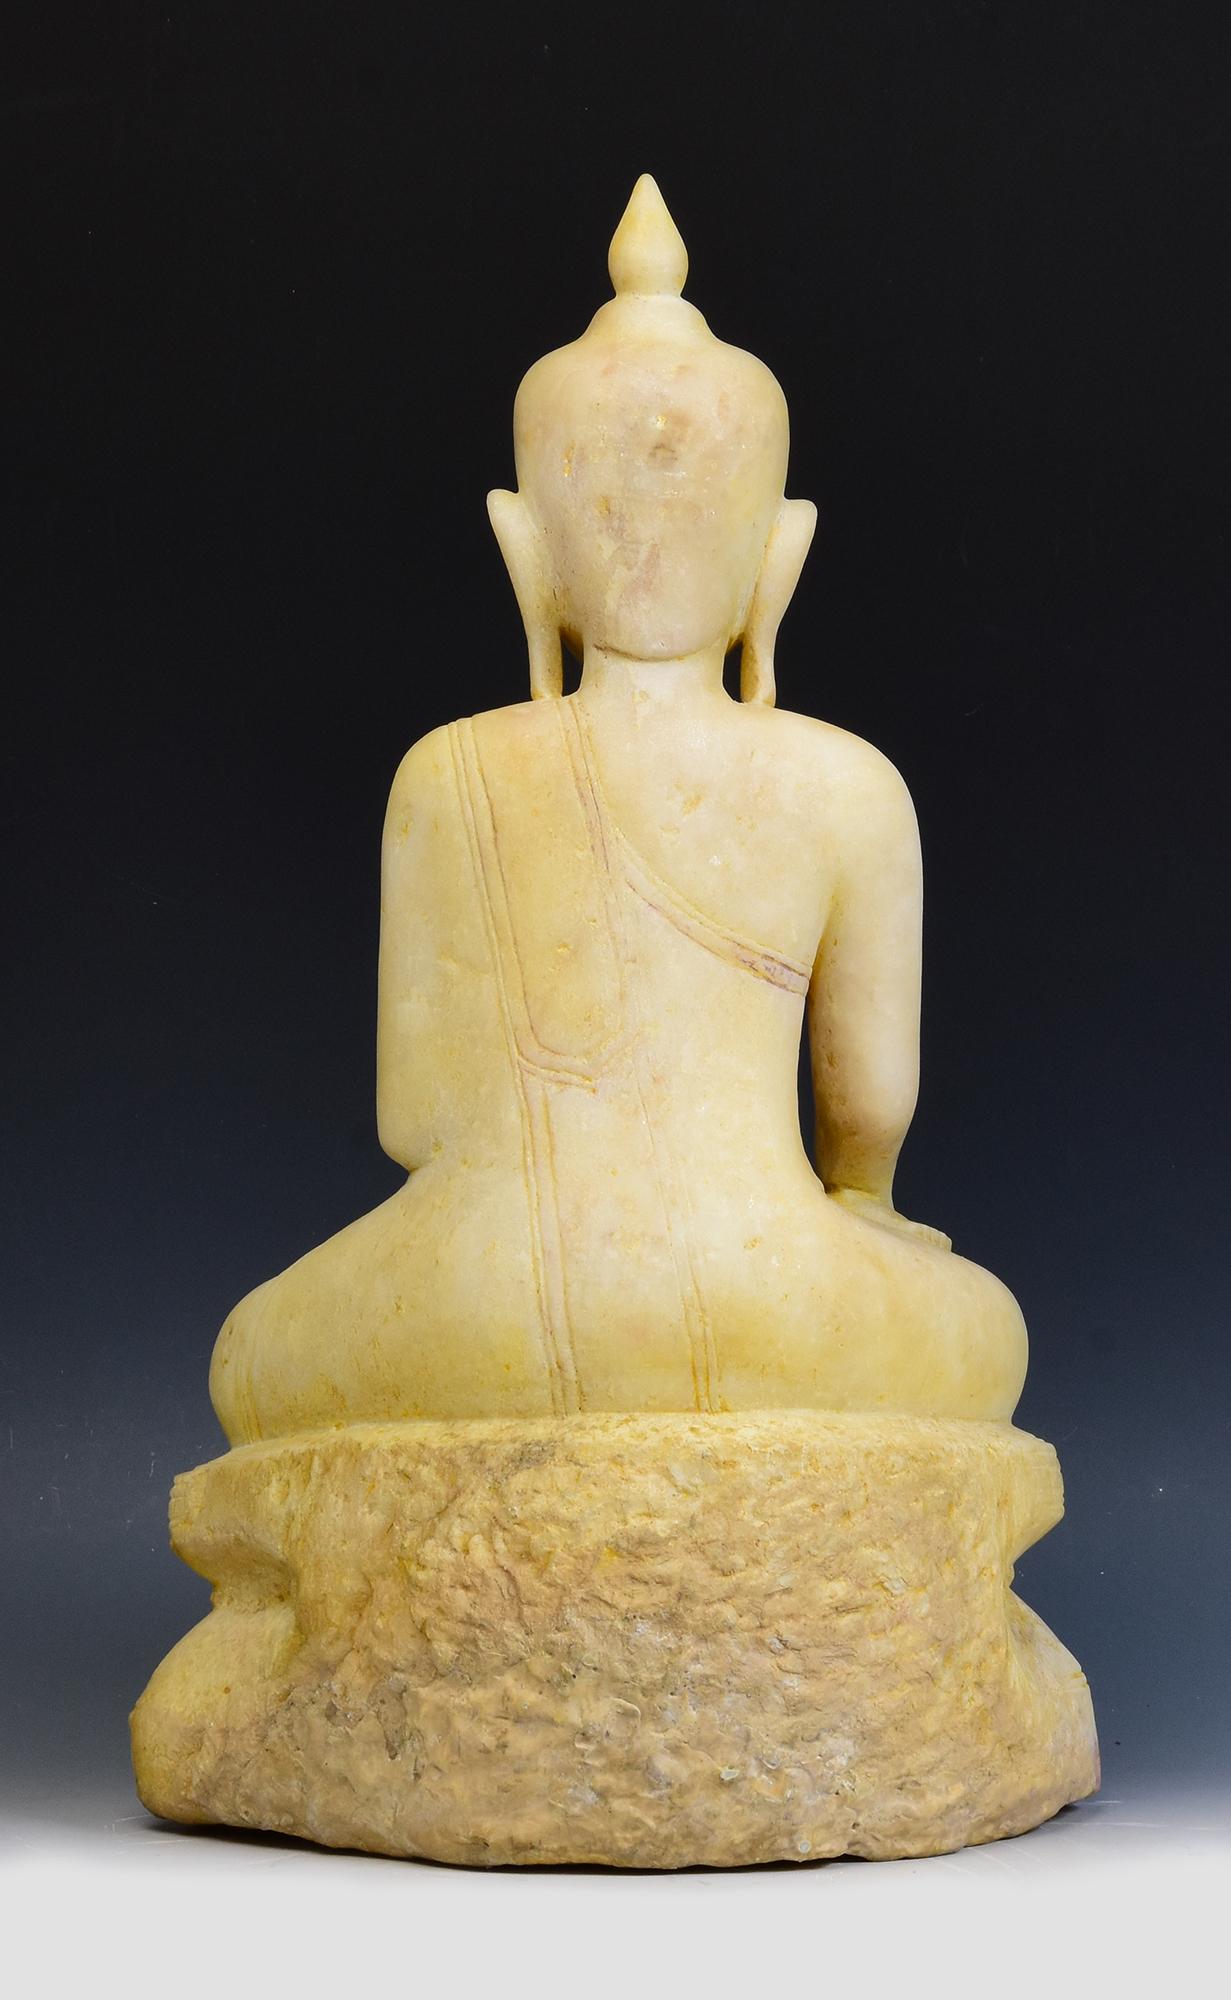 17th - 18th Century, Shan, Antique Burmese Alabaster Marble Seated Buddha Statue 5